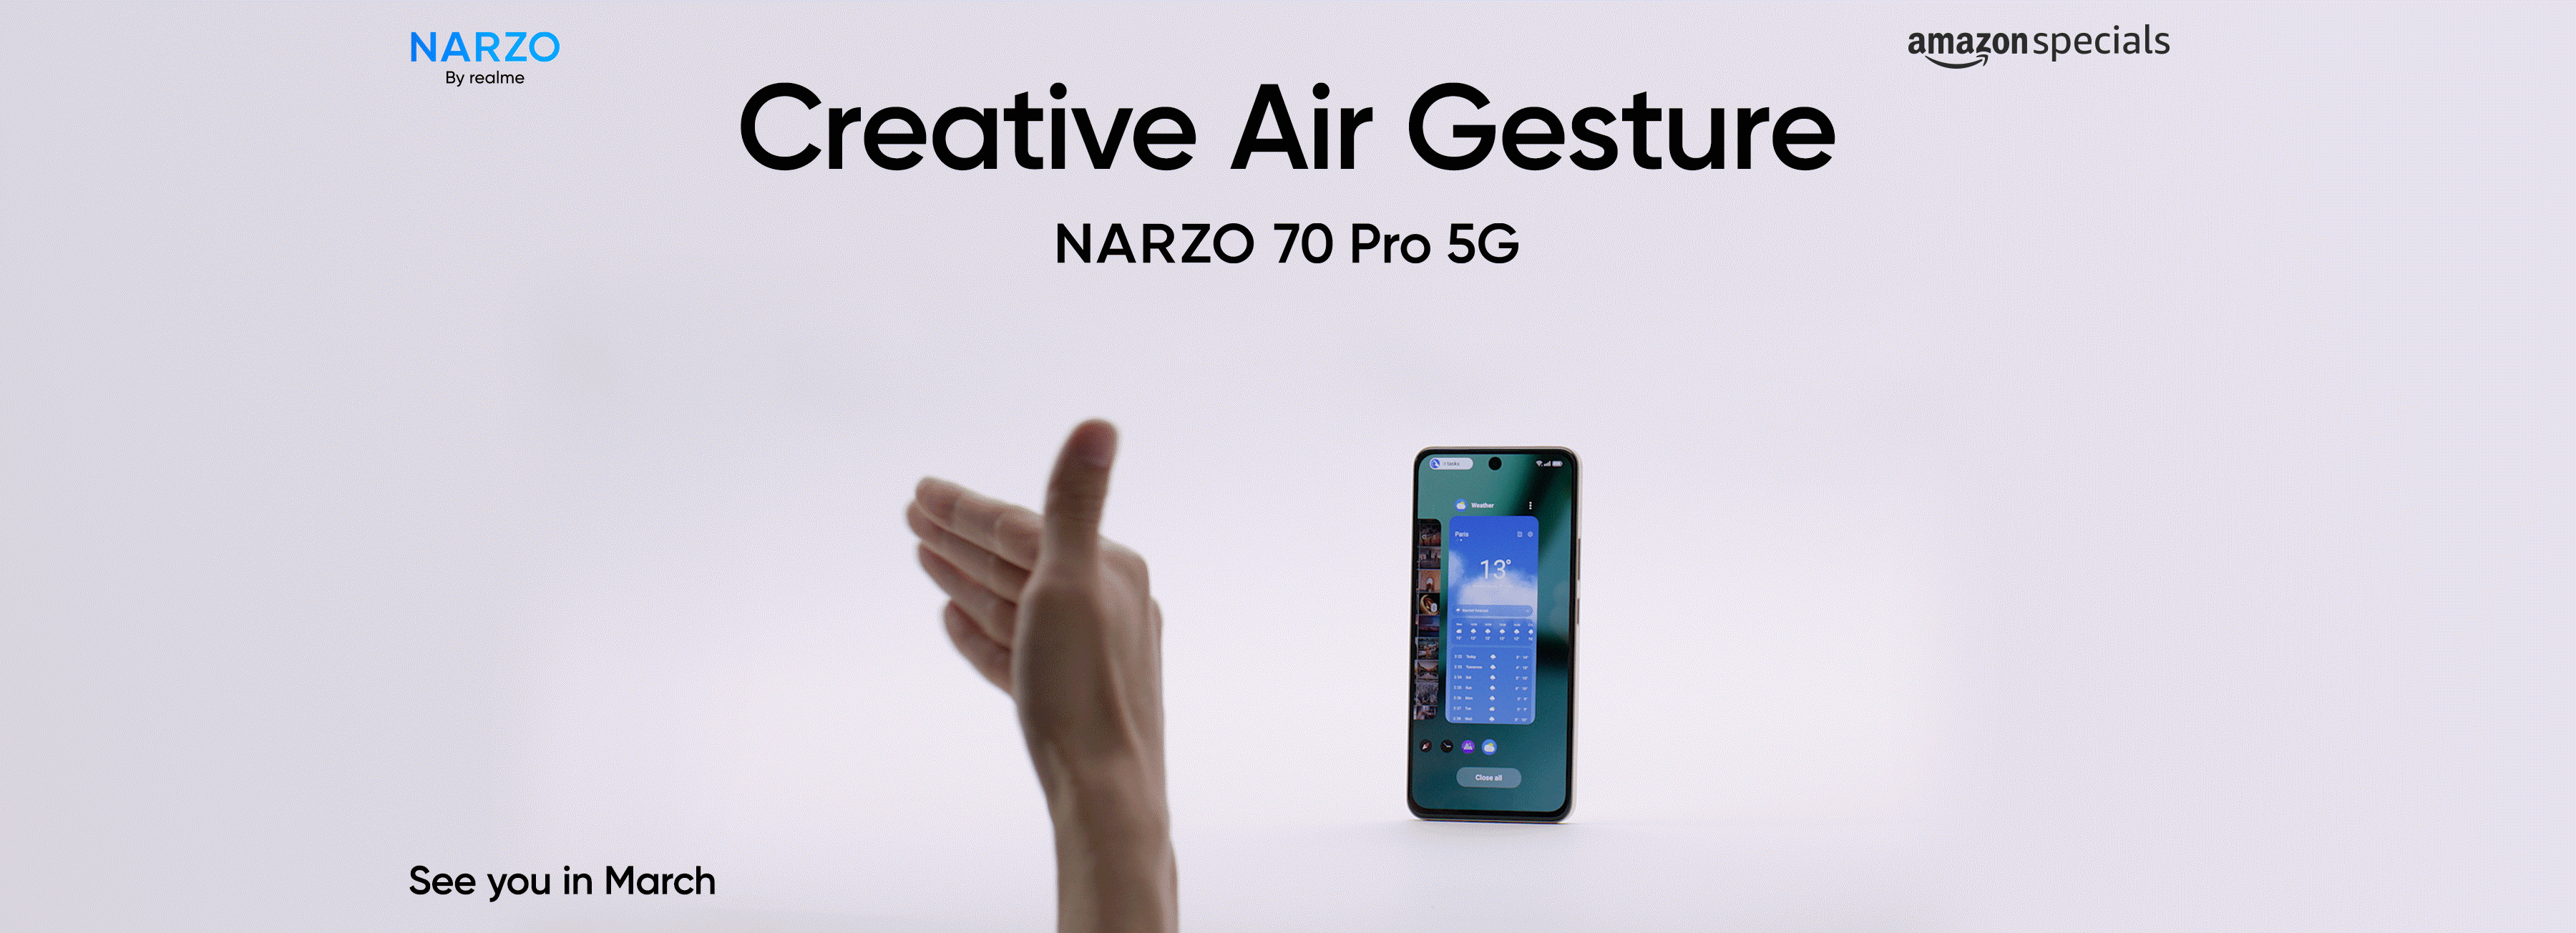 Realme Narzo 70 Pro 5G will come with Air Gesture feature